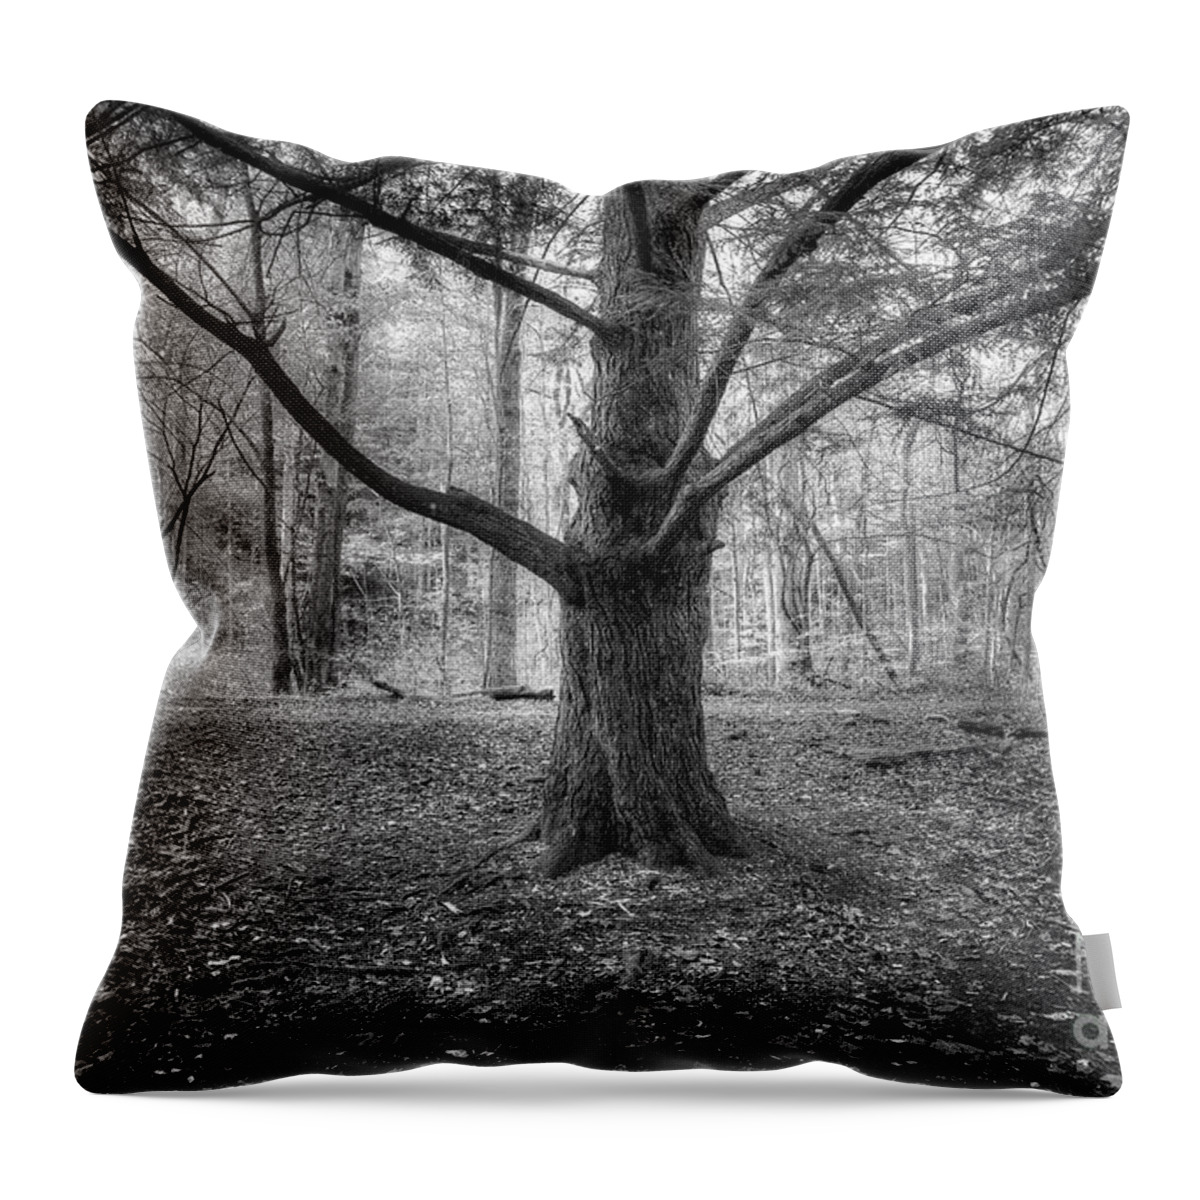 Pine Tree Throw Pillow featuring the photograph Pine Tree by Mike Eingle